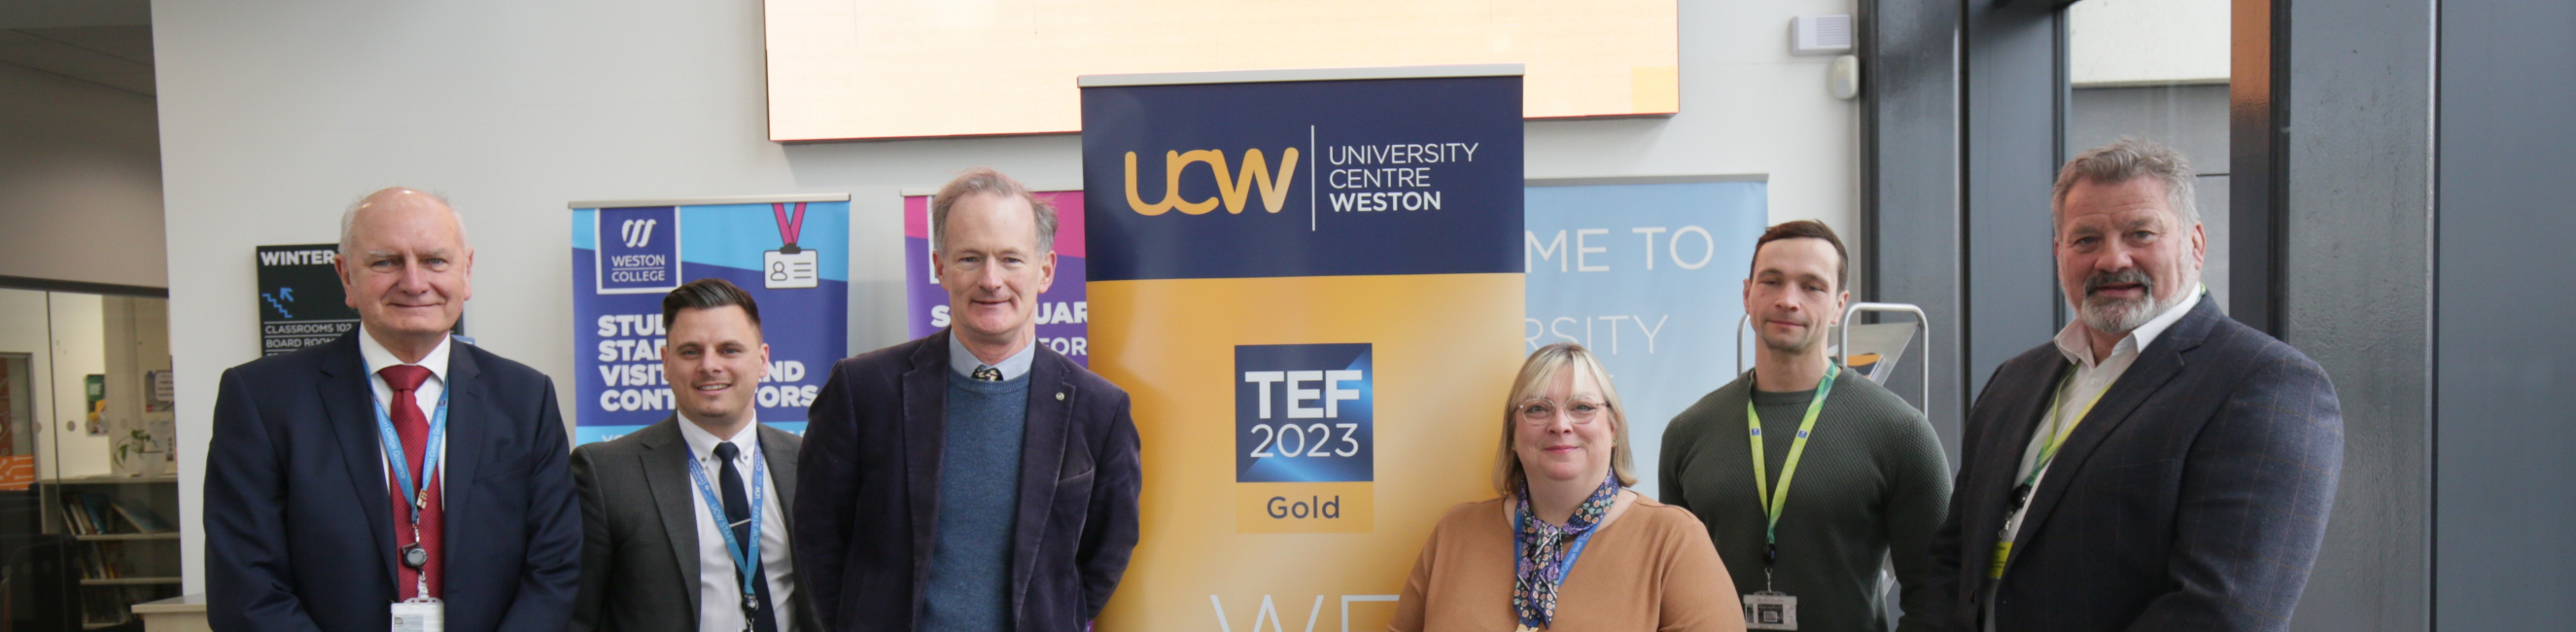 John Penrose, Andrew Leighton-Price and others stand by a sign saying UCW 'TEF Gold'